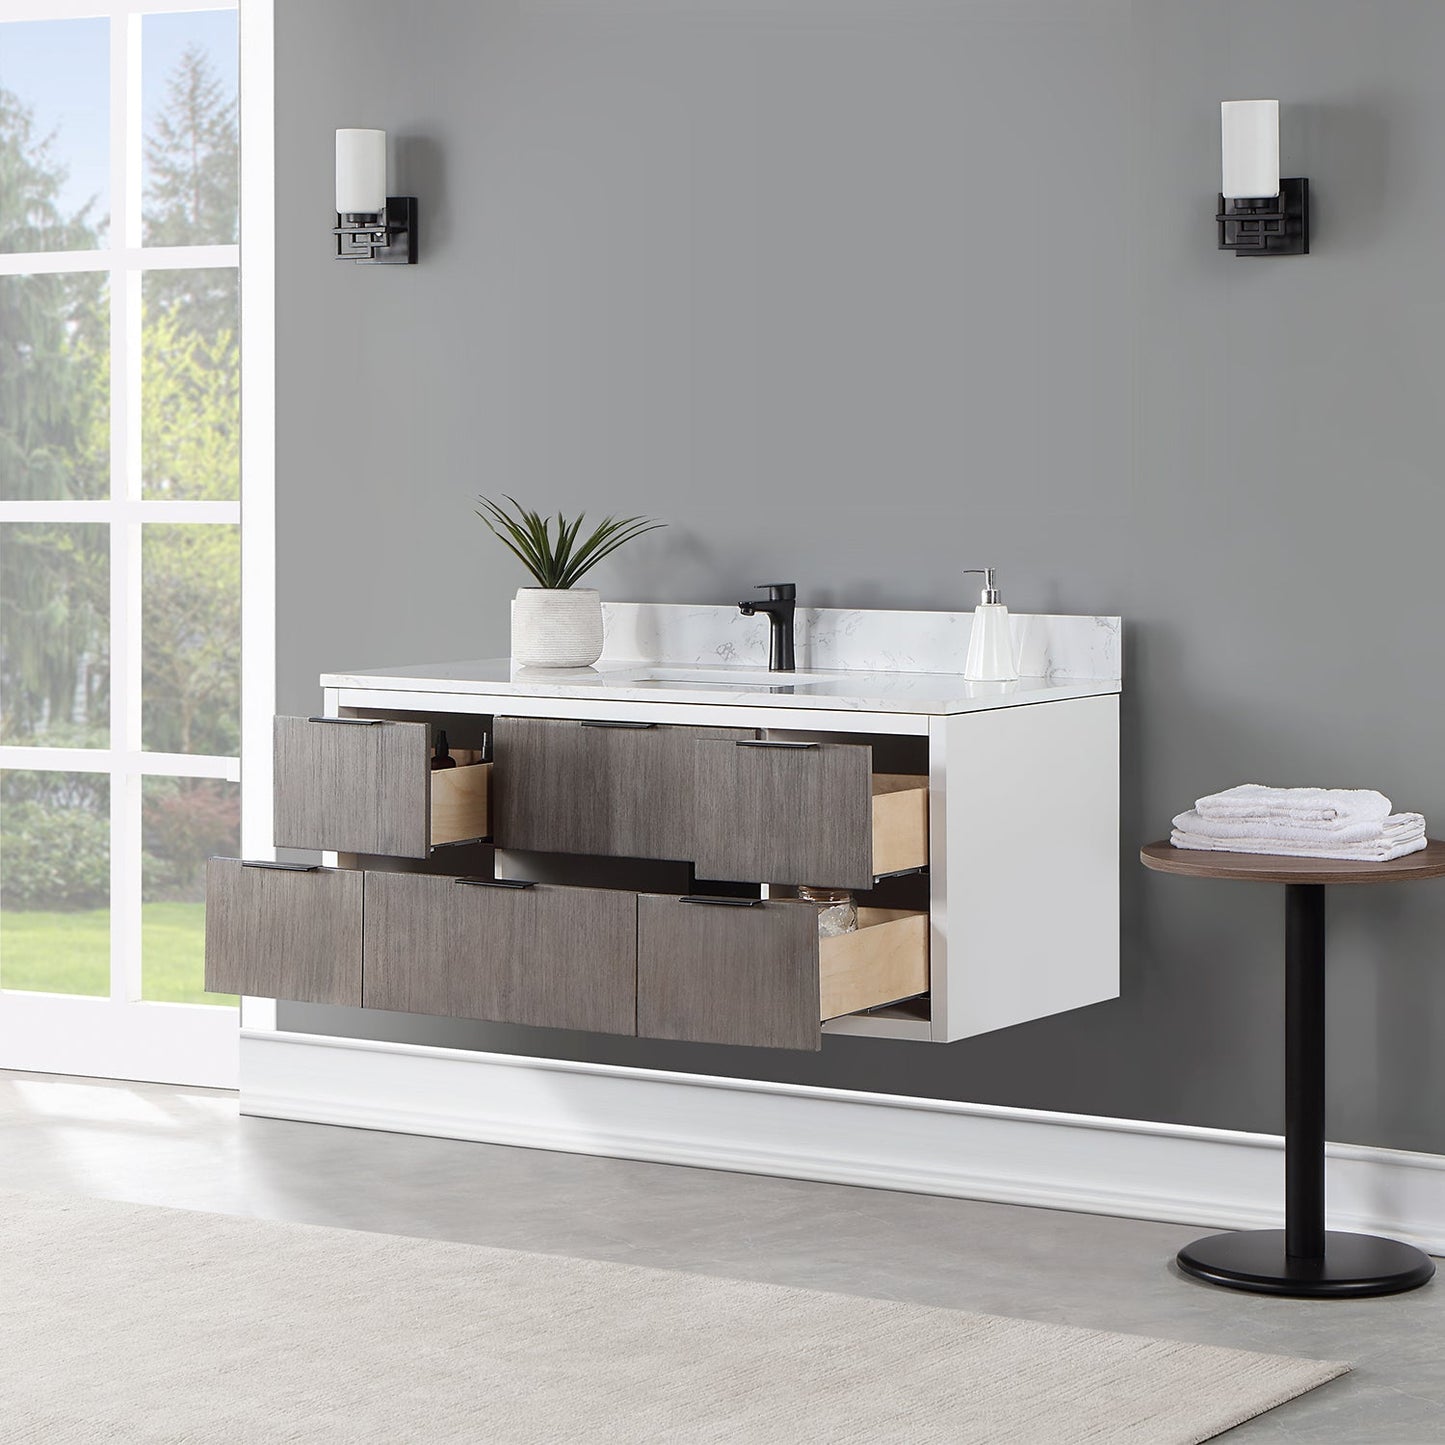 Dione 48" Single Bathroom Vanity in Classical Gray with Carrara White Composite Stone Countertop without Mirror